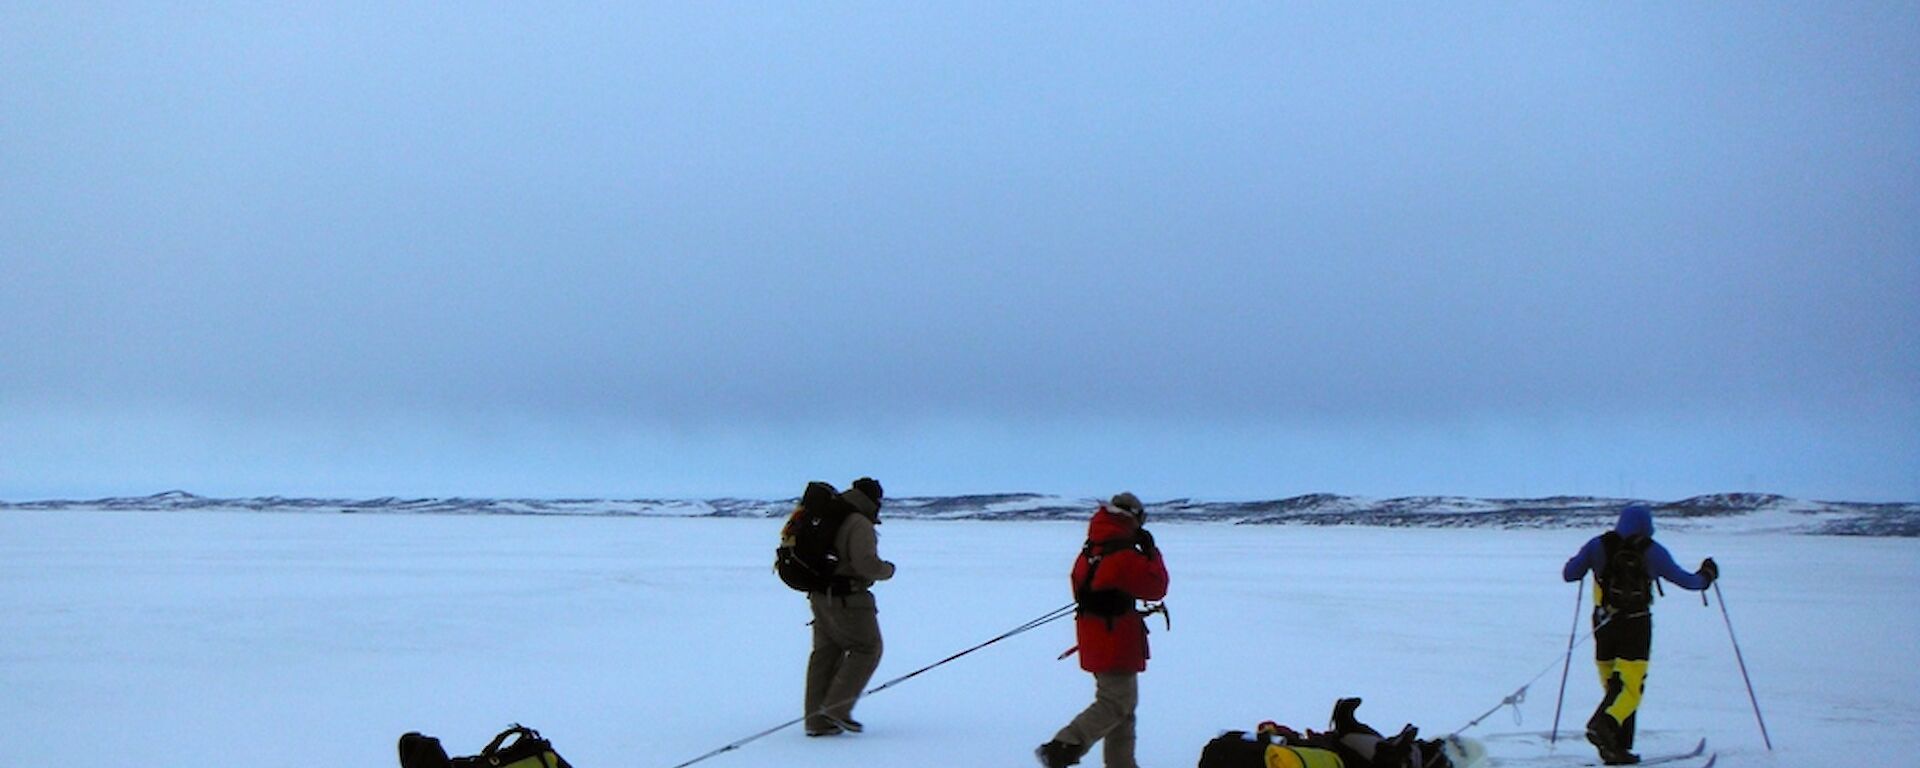 Two expeditioners walking and one cross country skiing dragging a sled on the sea ice